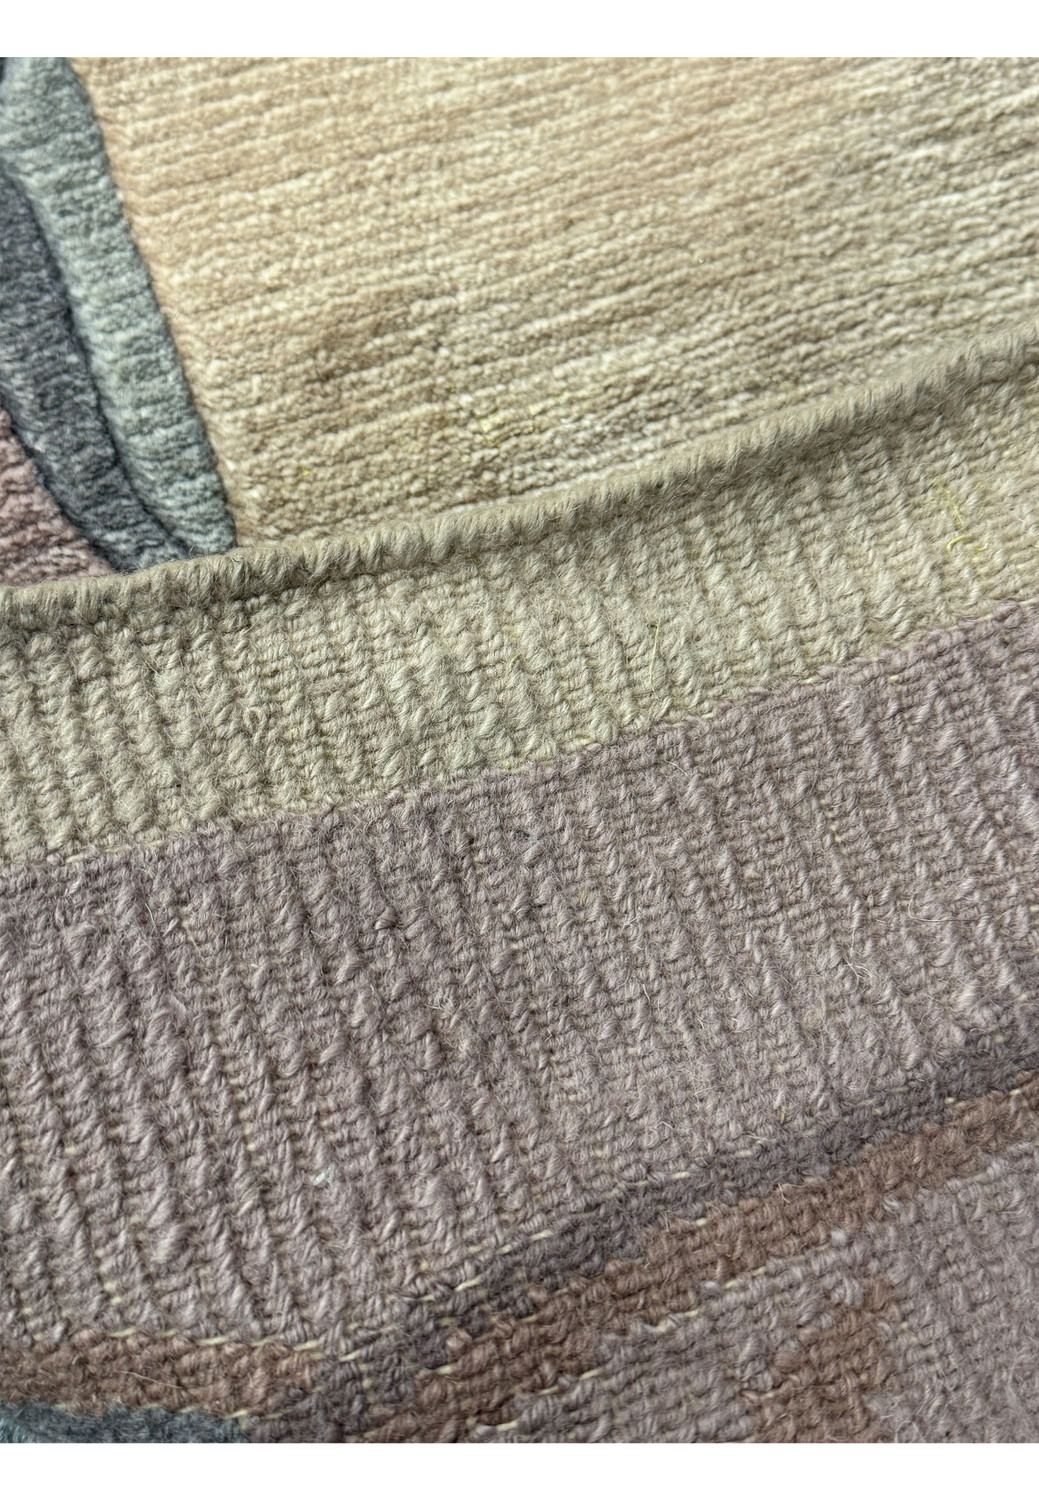 Close-up on the Modern Royal Tibetan rug's texture and subtle color variation in natural light. Showing the back of the rug to illustrate the professional handmade weaving technique